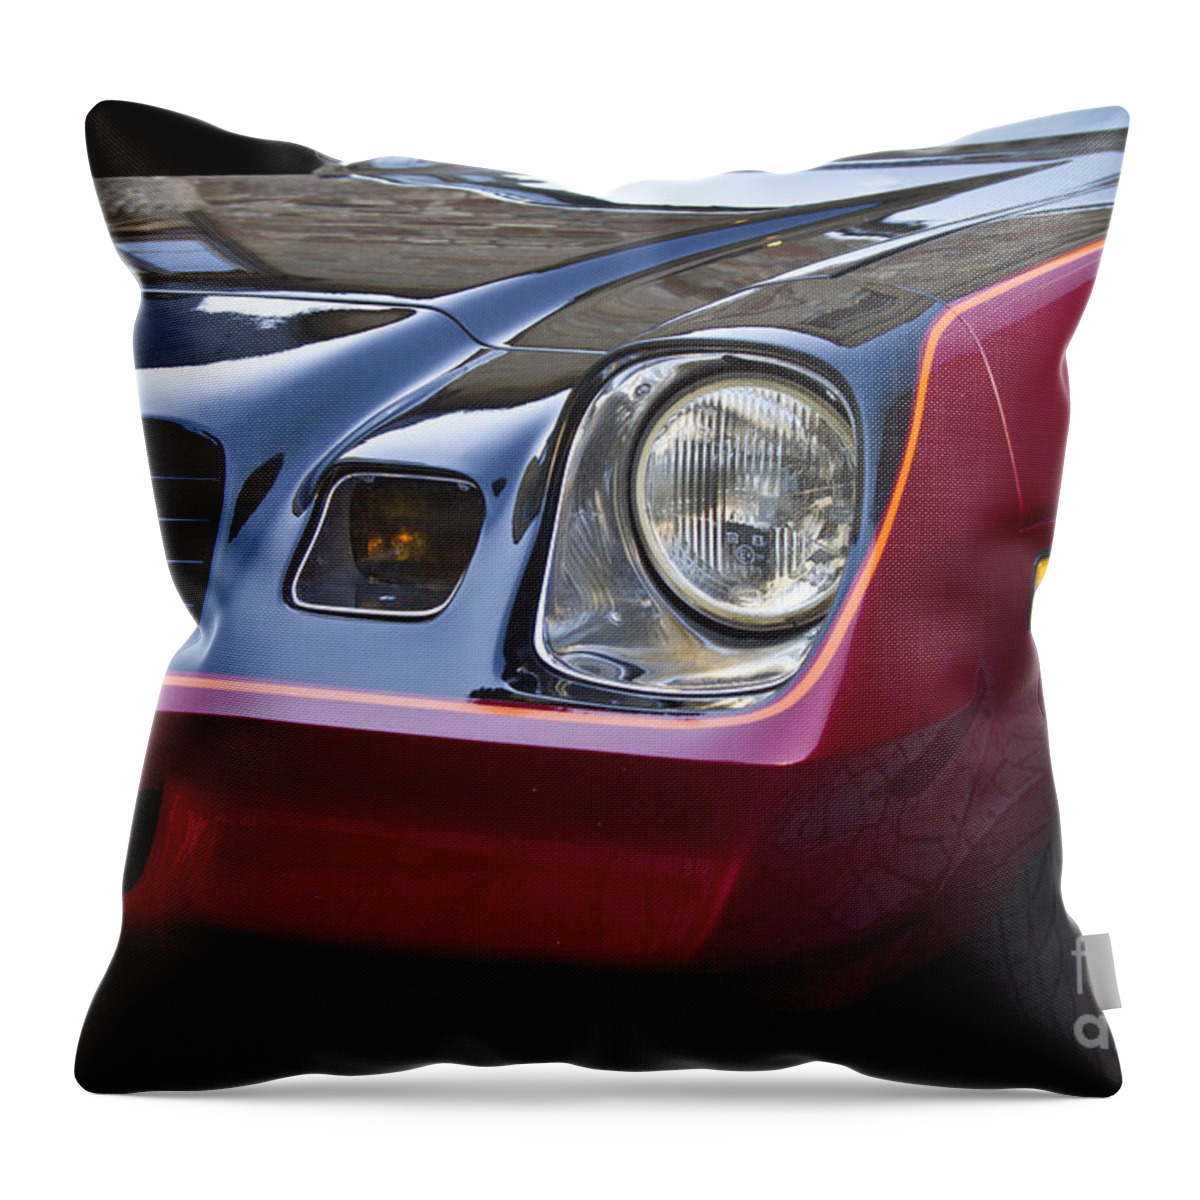 Chevrolet Camaro Throw Pillow featuring the photograph Classic Chevrolet Camaro by Heiko Koehrer-Wagner